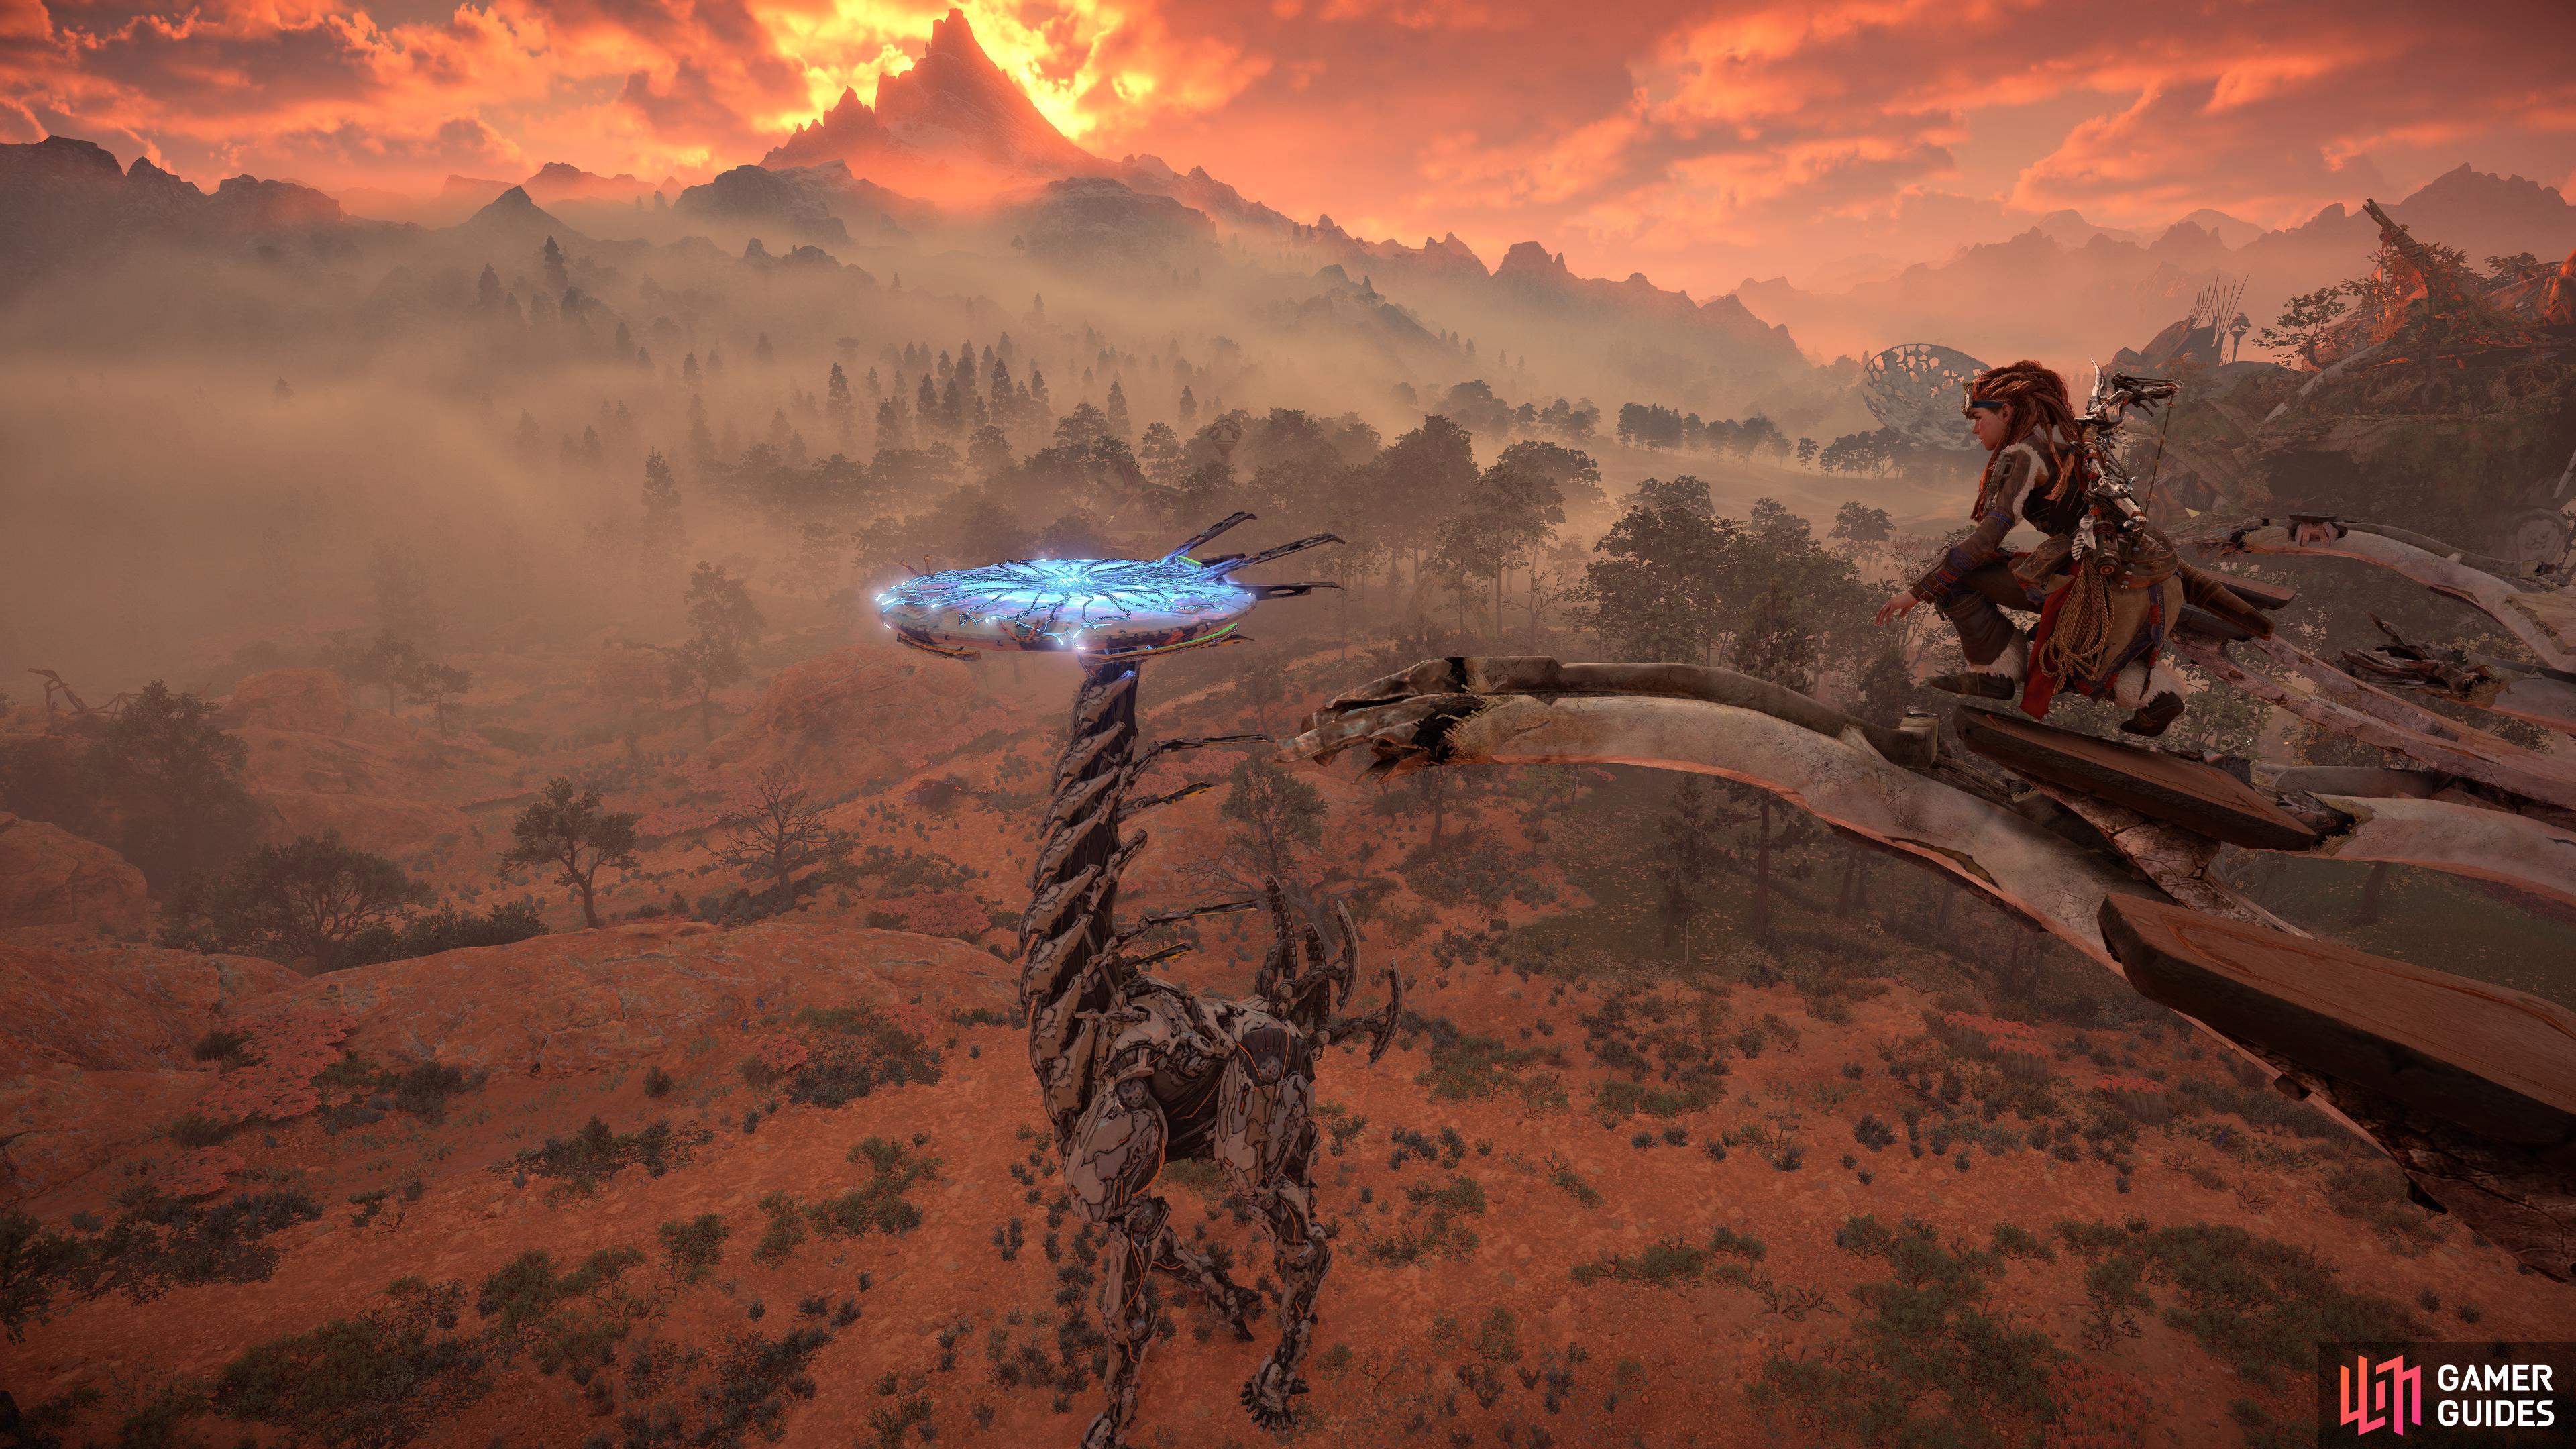 A Tallneck roams in the distance.